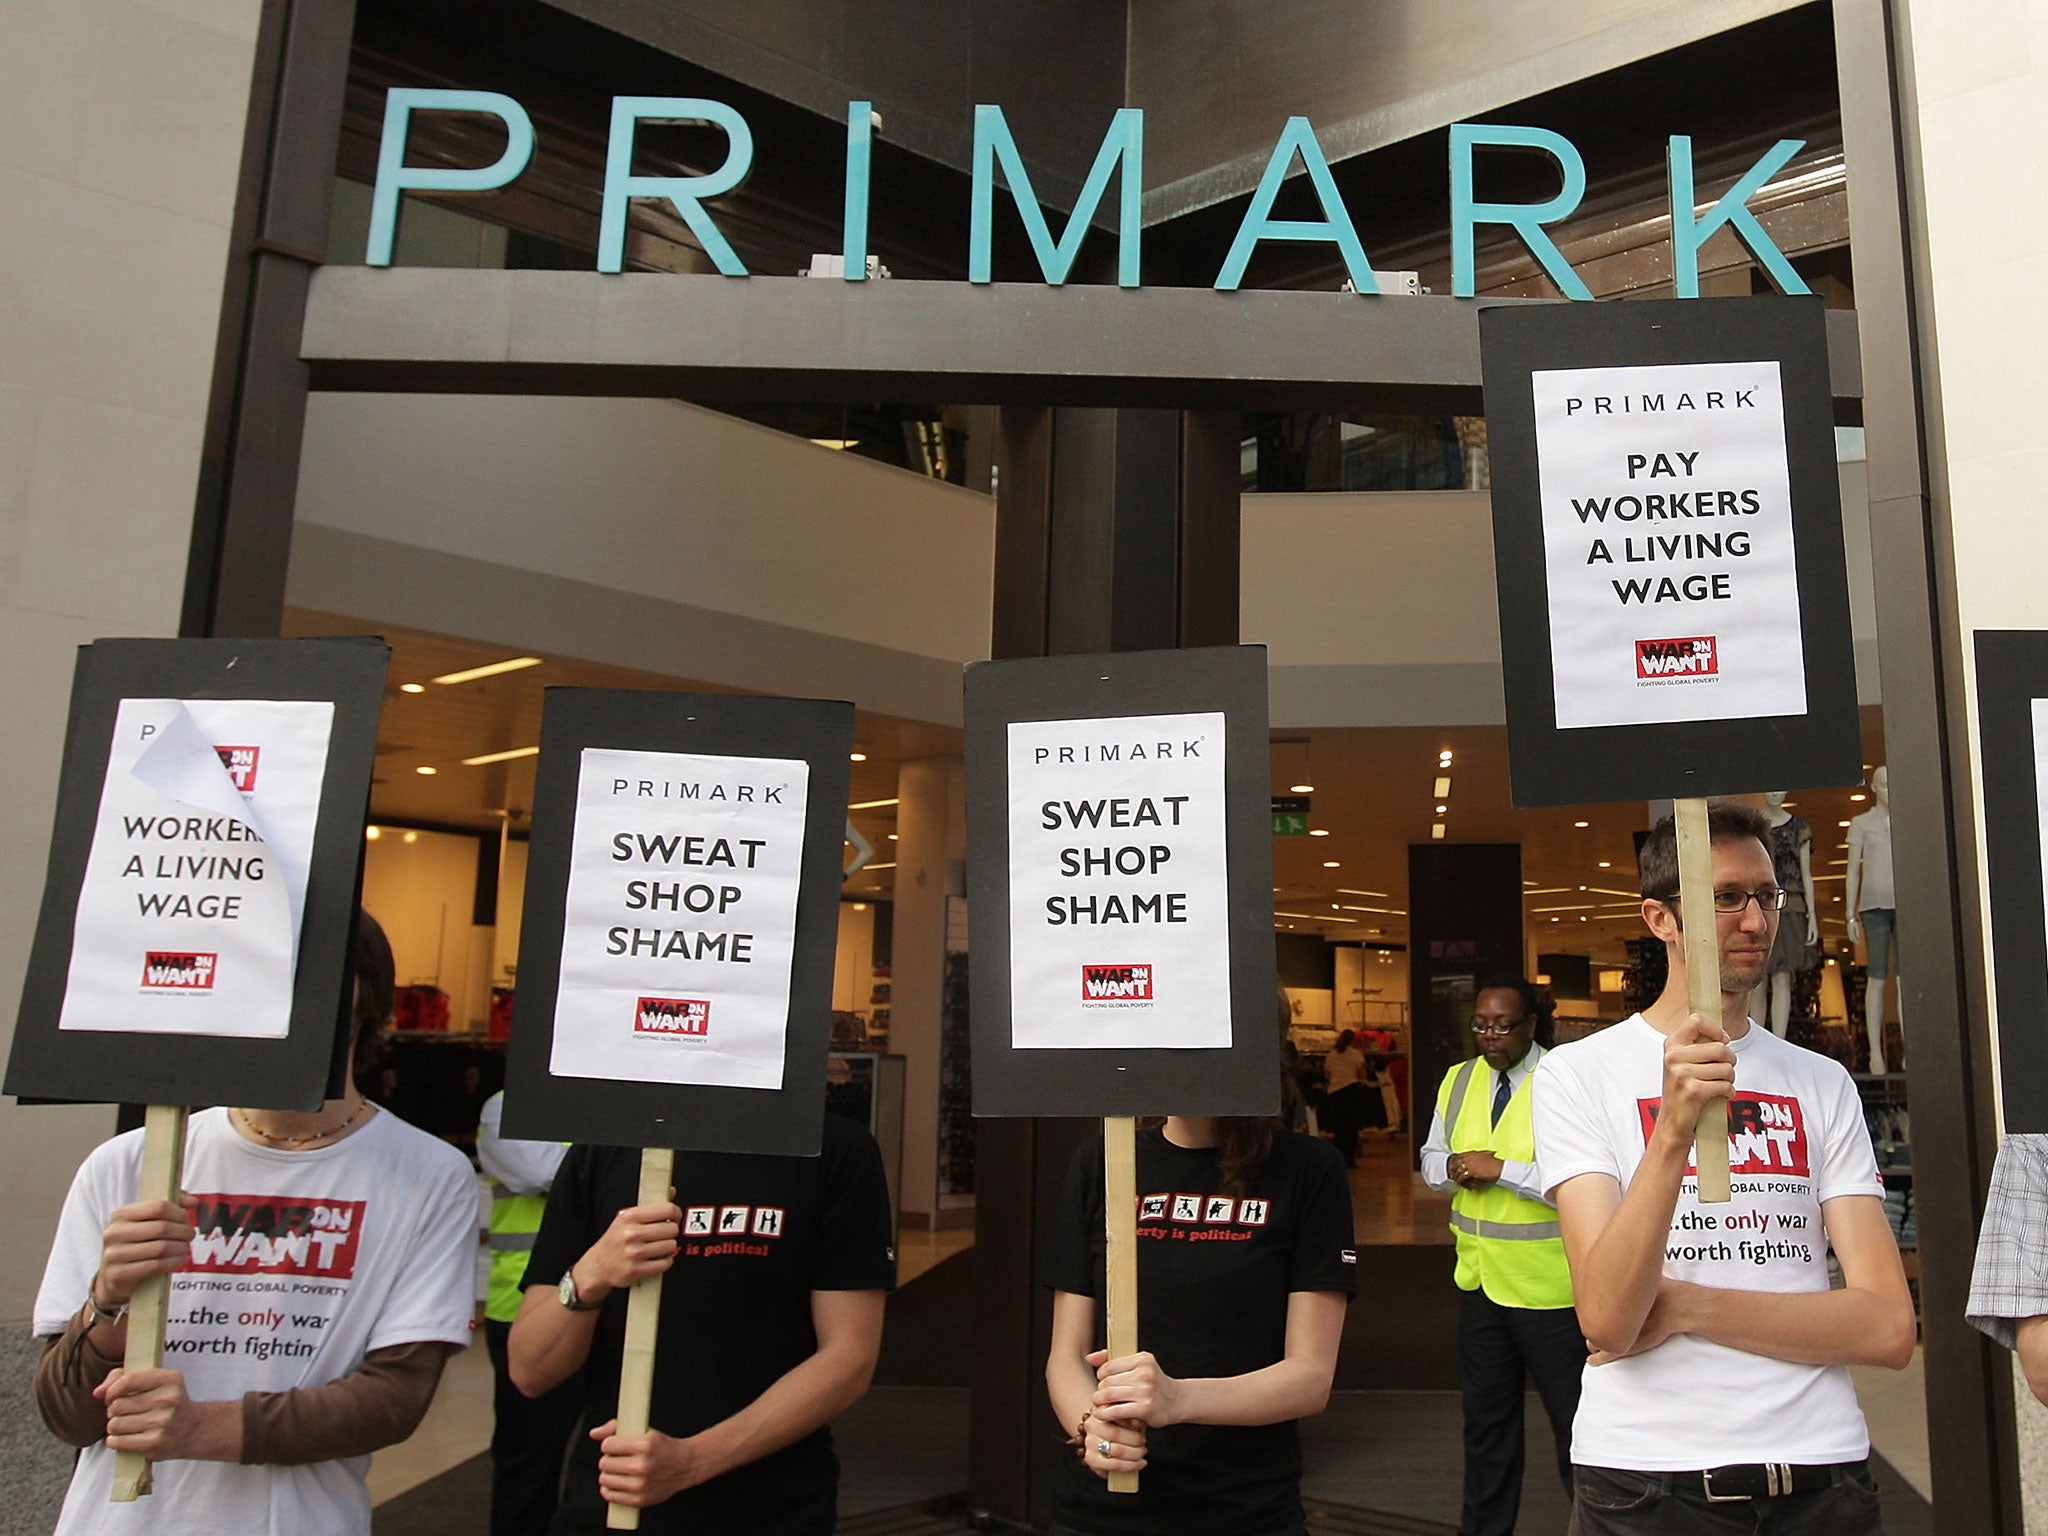 I'm a savvy shopper & here are 4 things you should never buy from Primark -  even the cheap face masks are a total waste